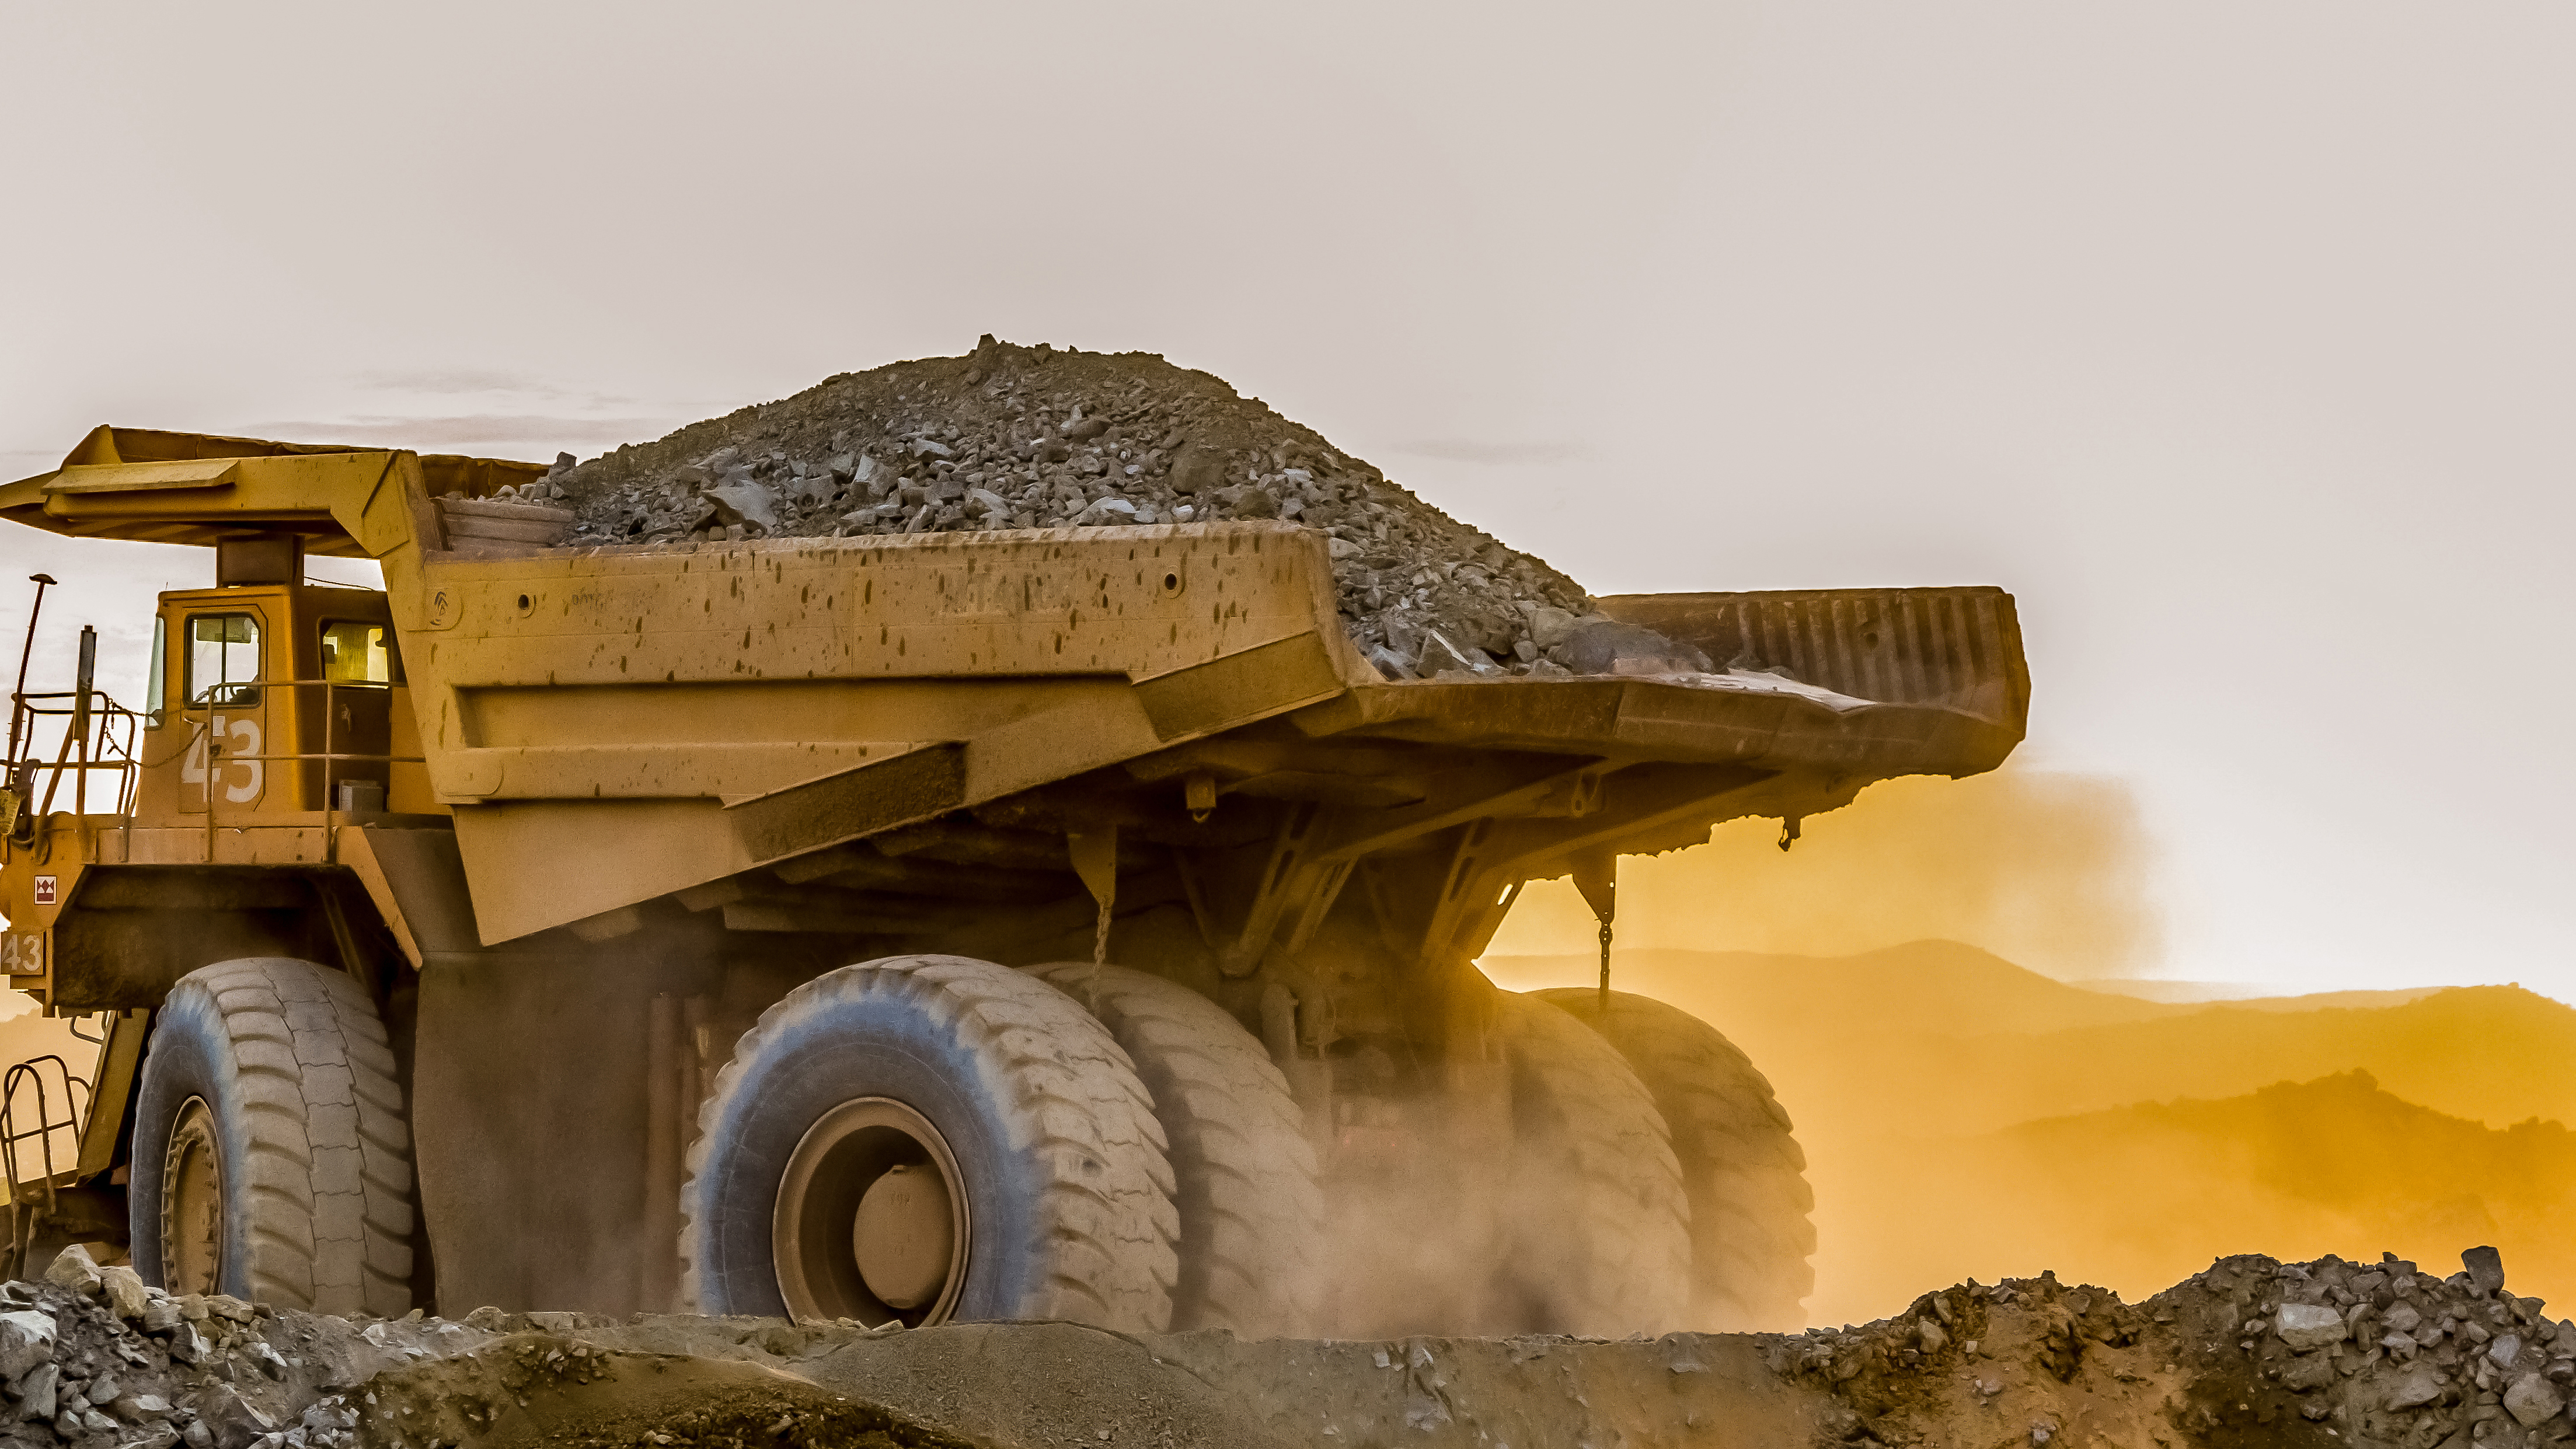 A large truck carrying sand on a platinum mining site in Africa